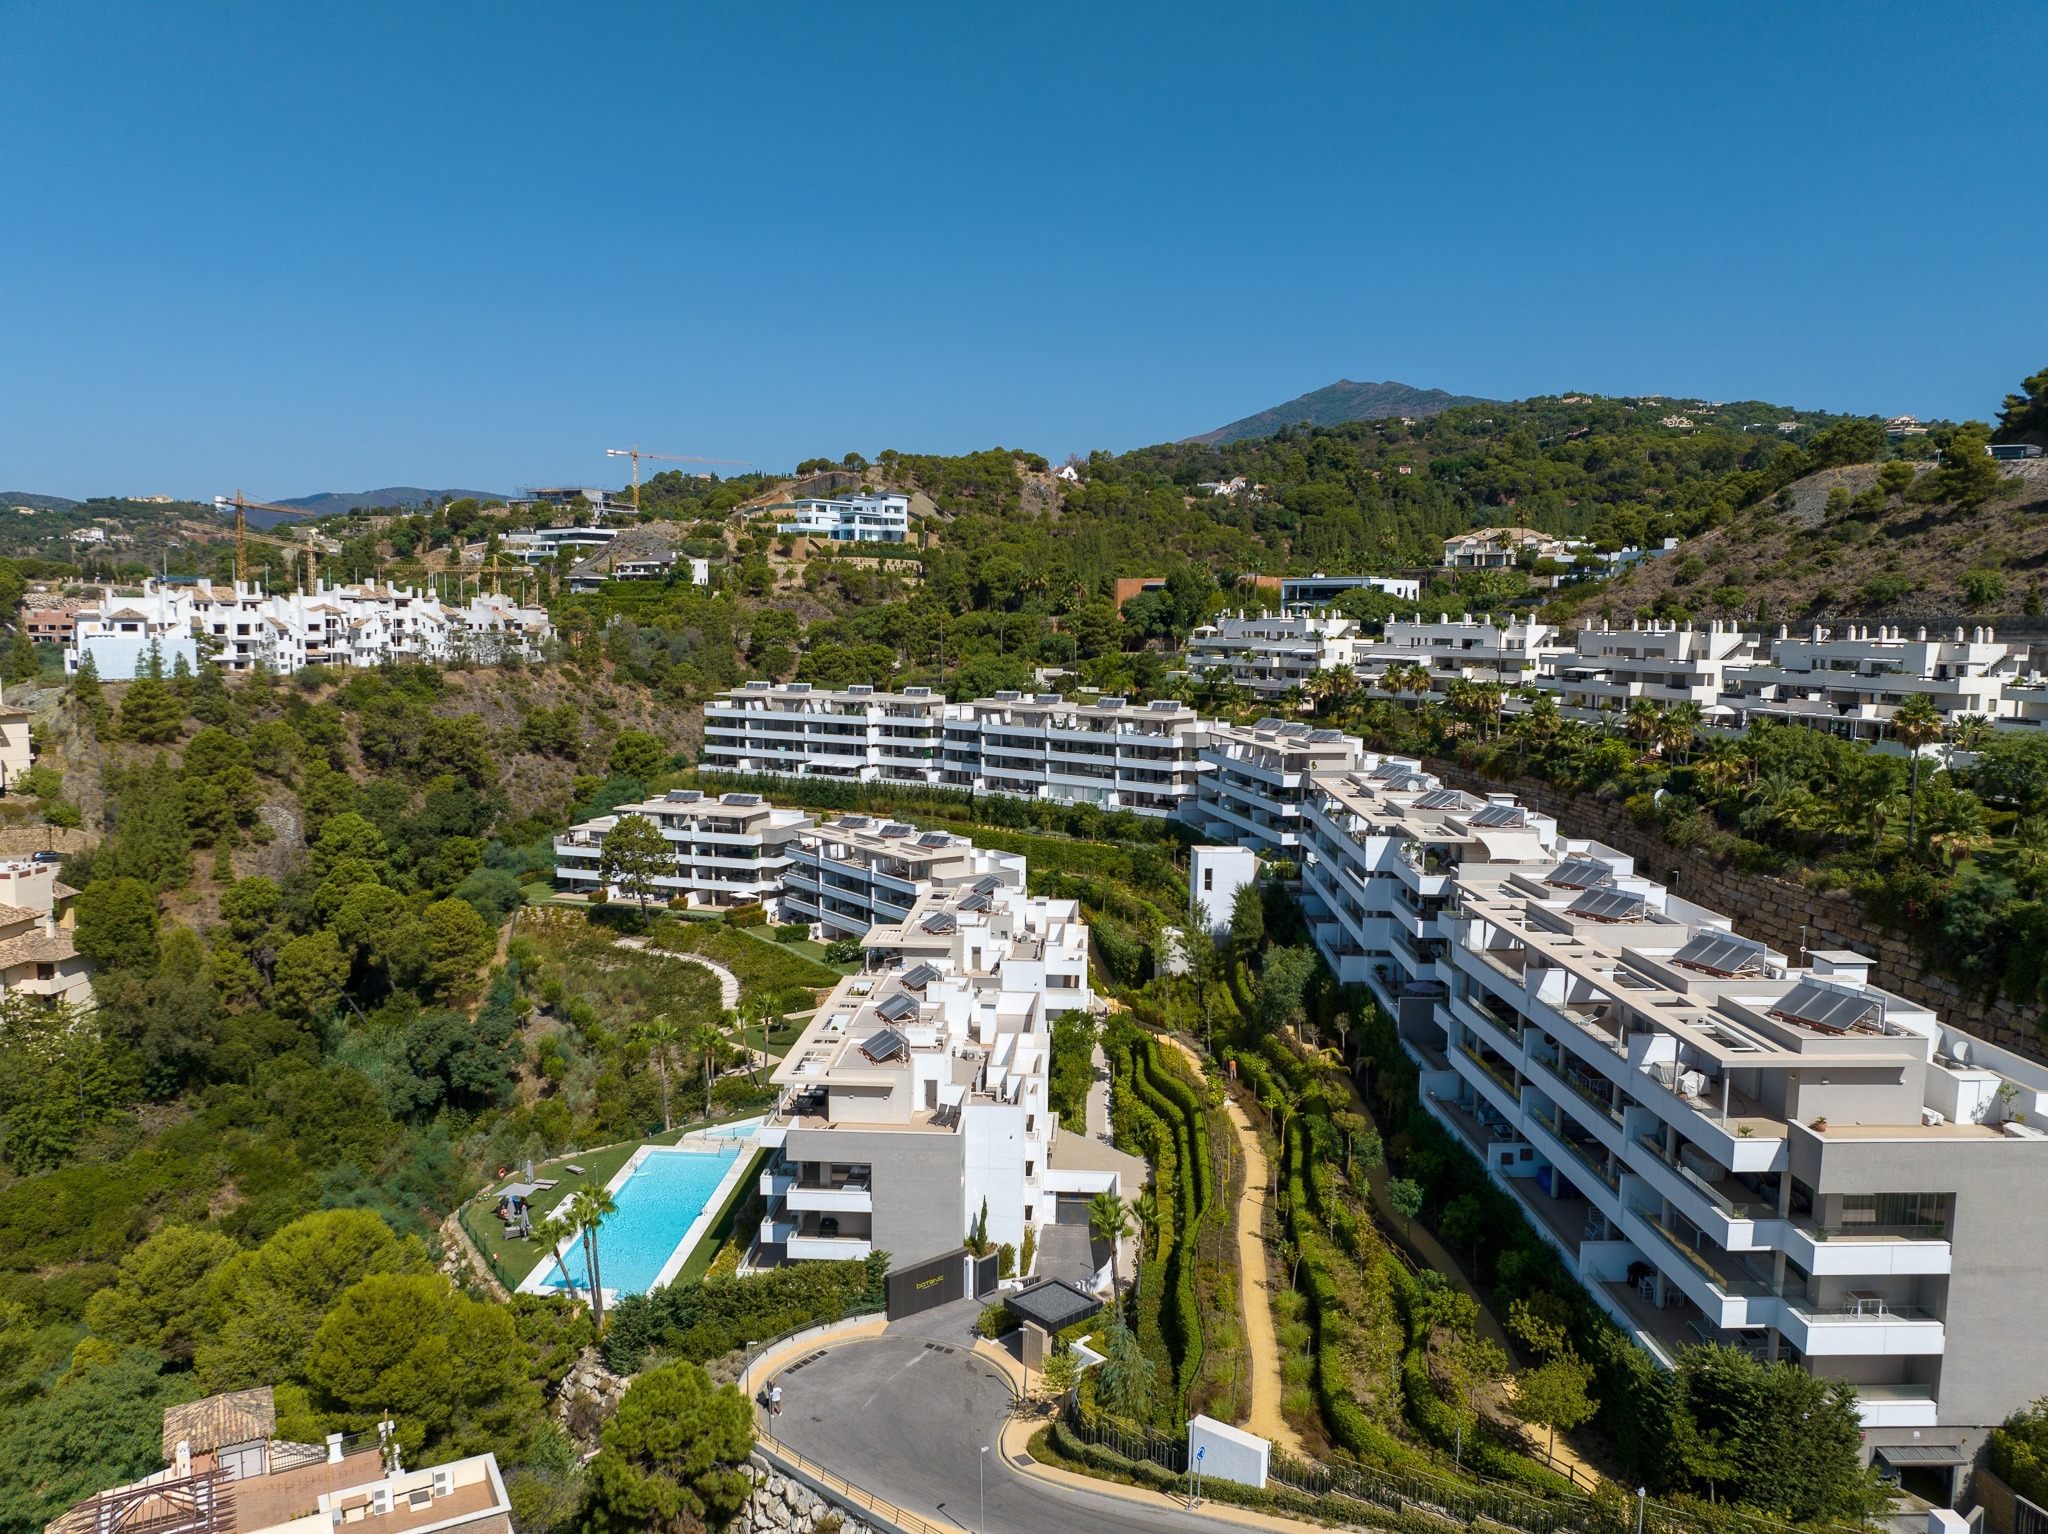 Penthouse in Benahavis real state